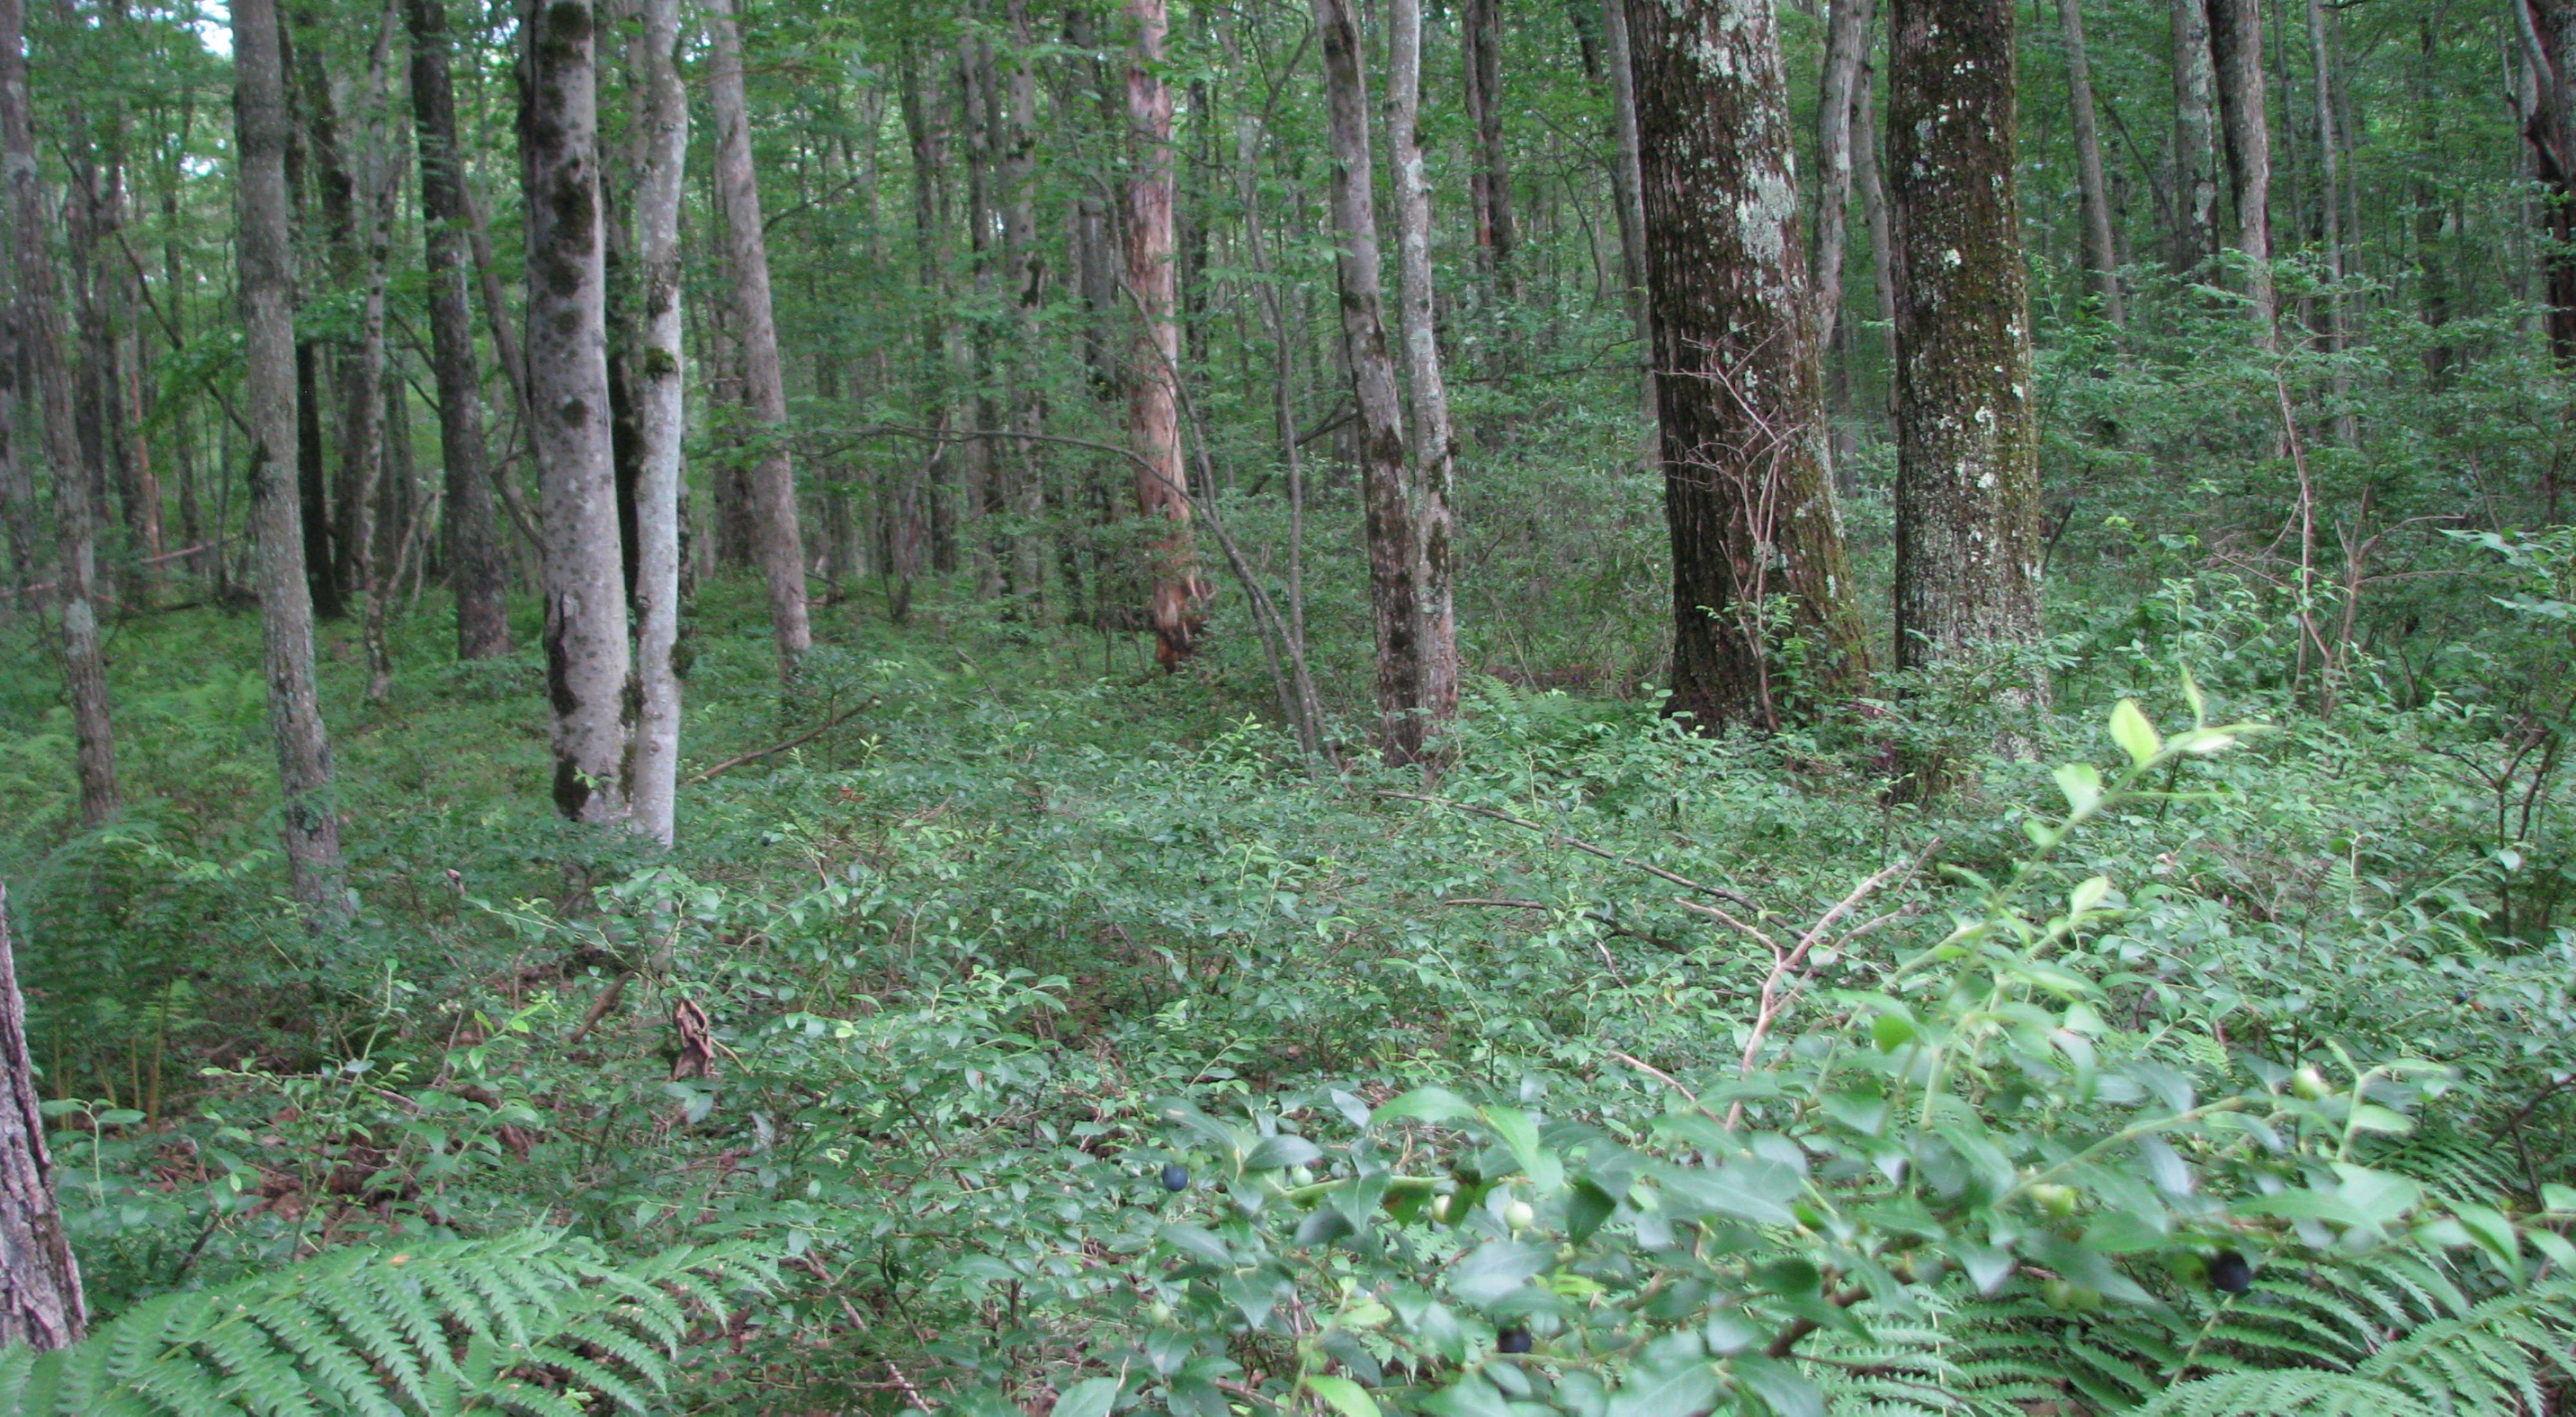 A view into a dense green forest.